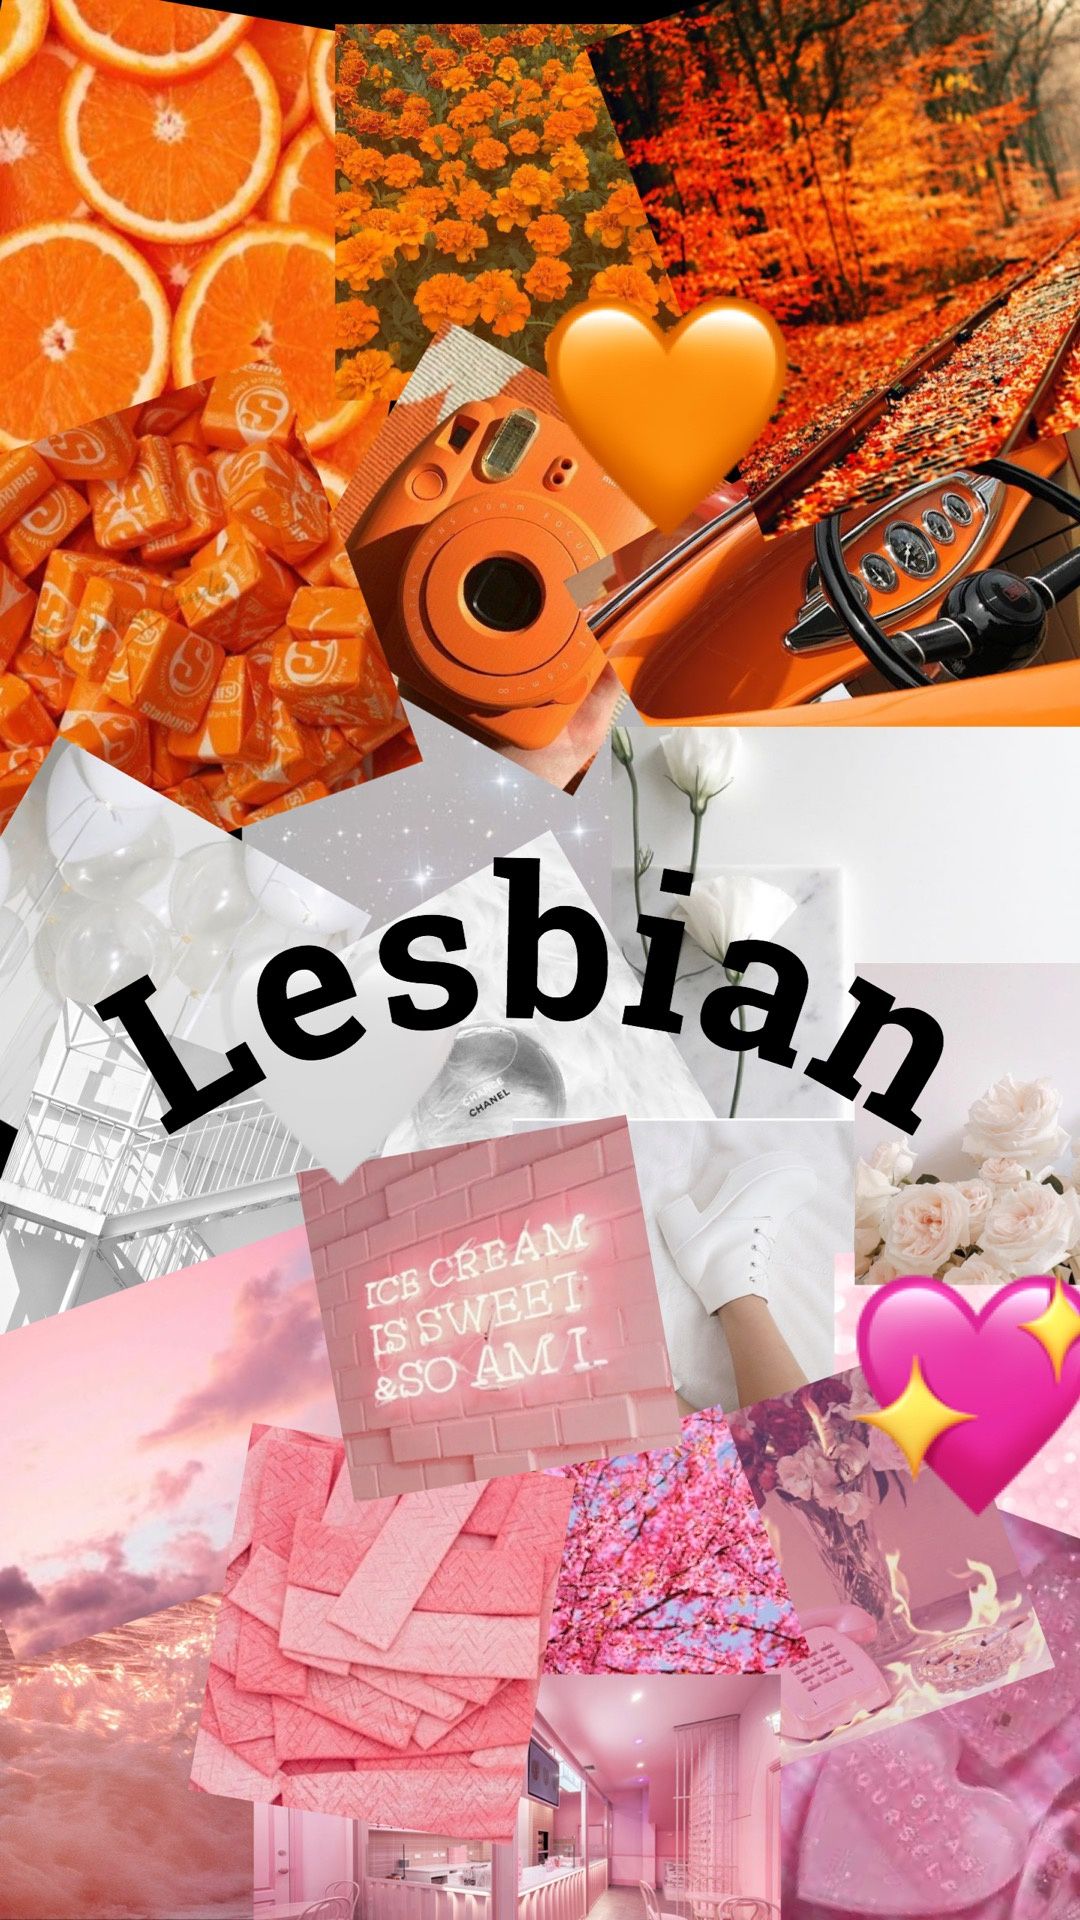 Cutsie Aesthetic Lesbian Wallpaper :) Edit: I MADE MORE! Check Out My Post On LGBT You To See Other Ones But These Are The Lesbian Ones:!